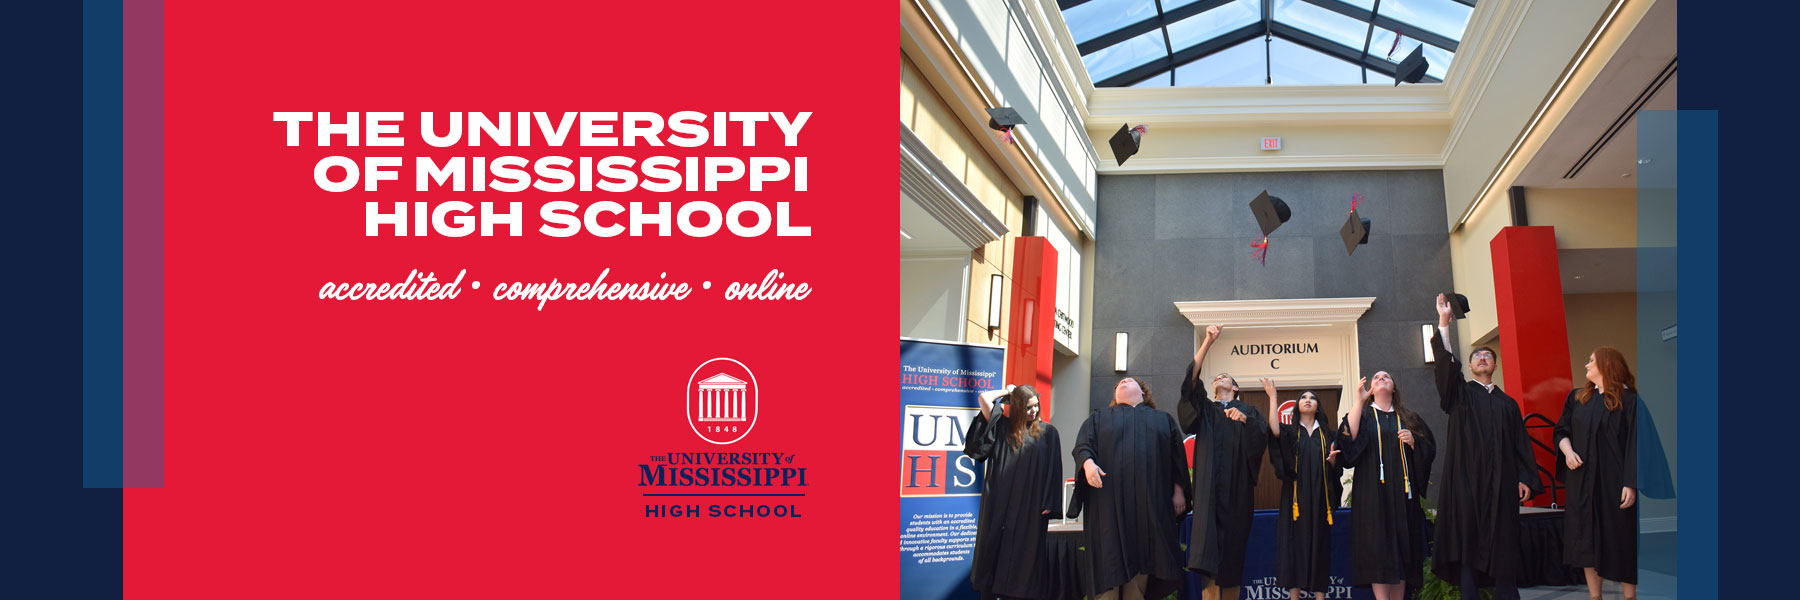 The University of Mississippi High School. Accredited. Comprehensive. Online.